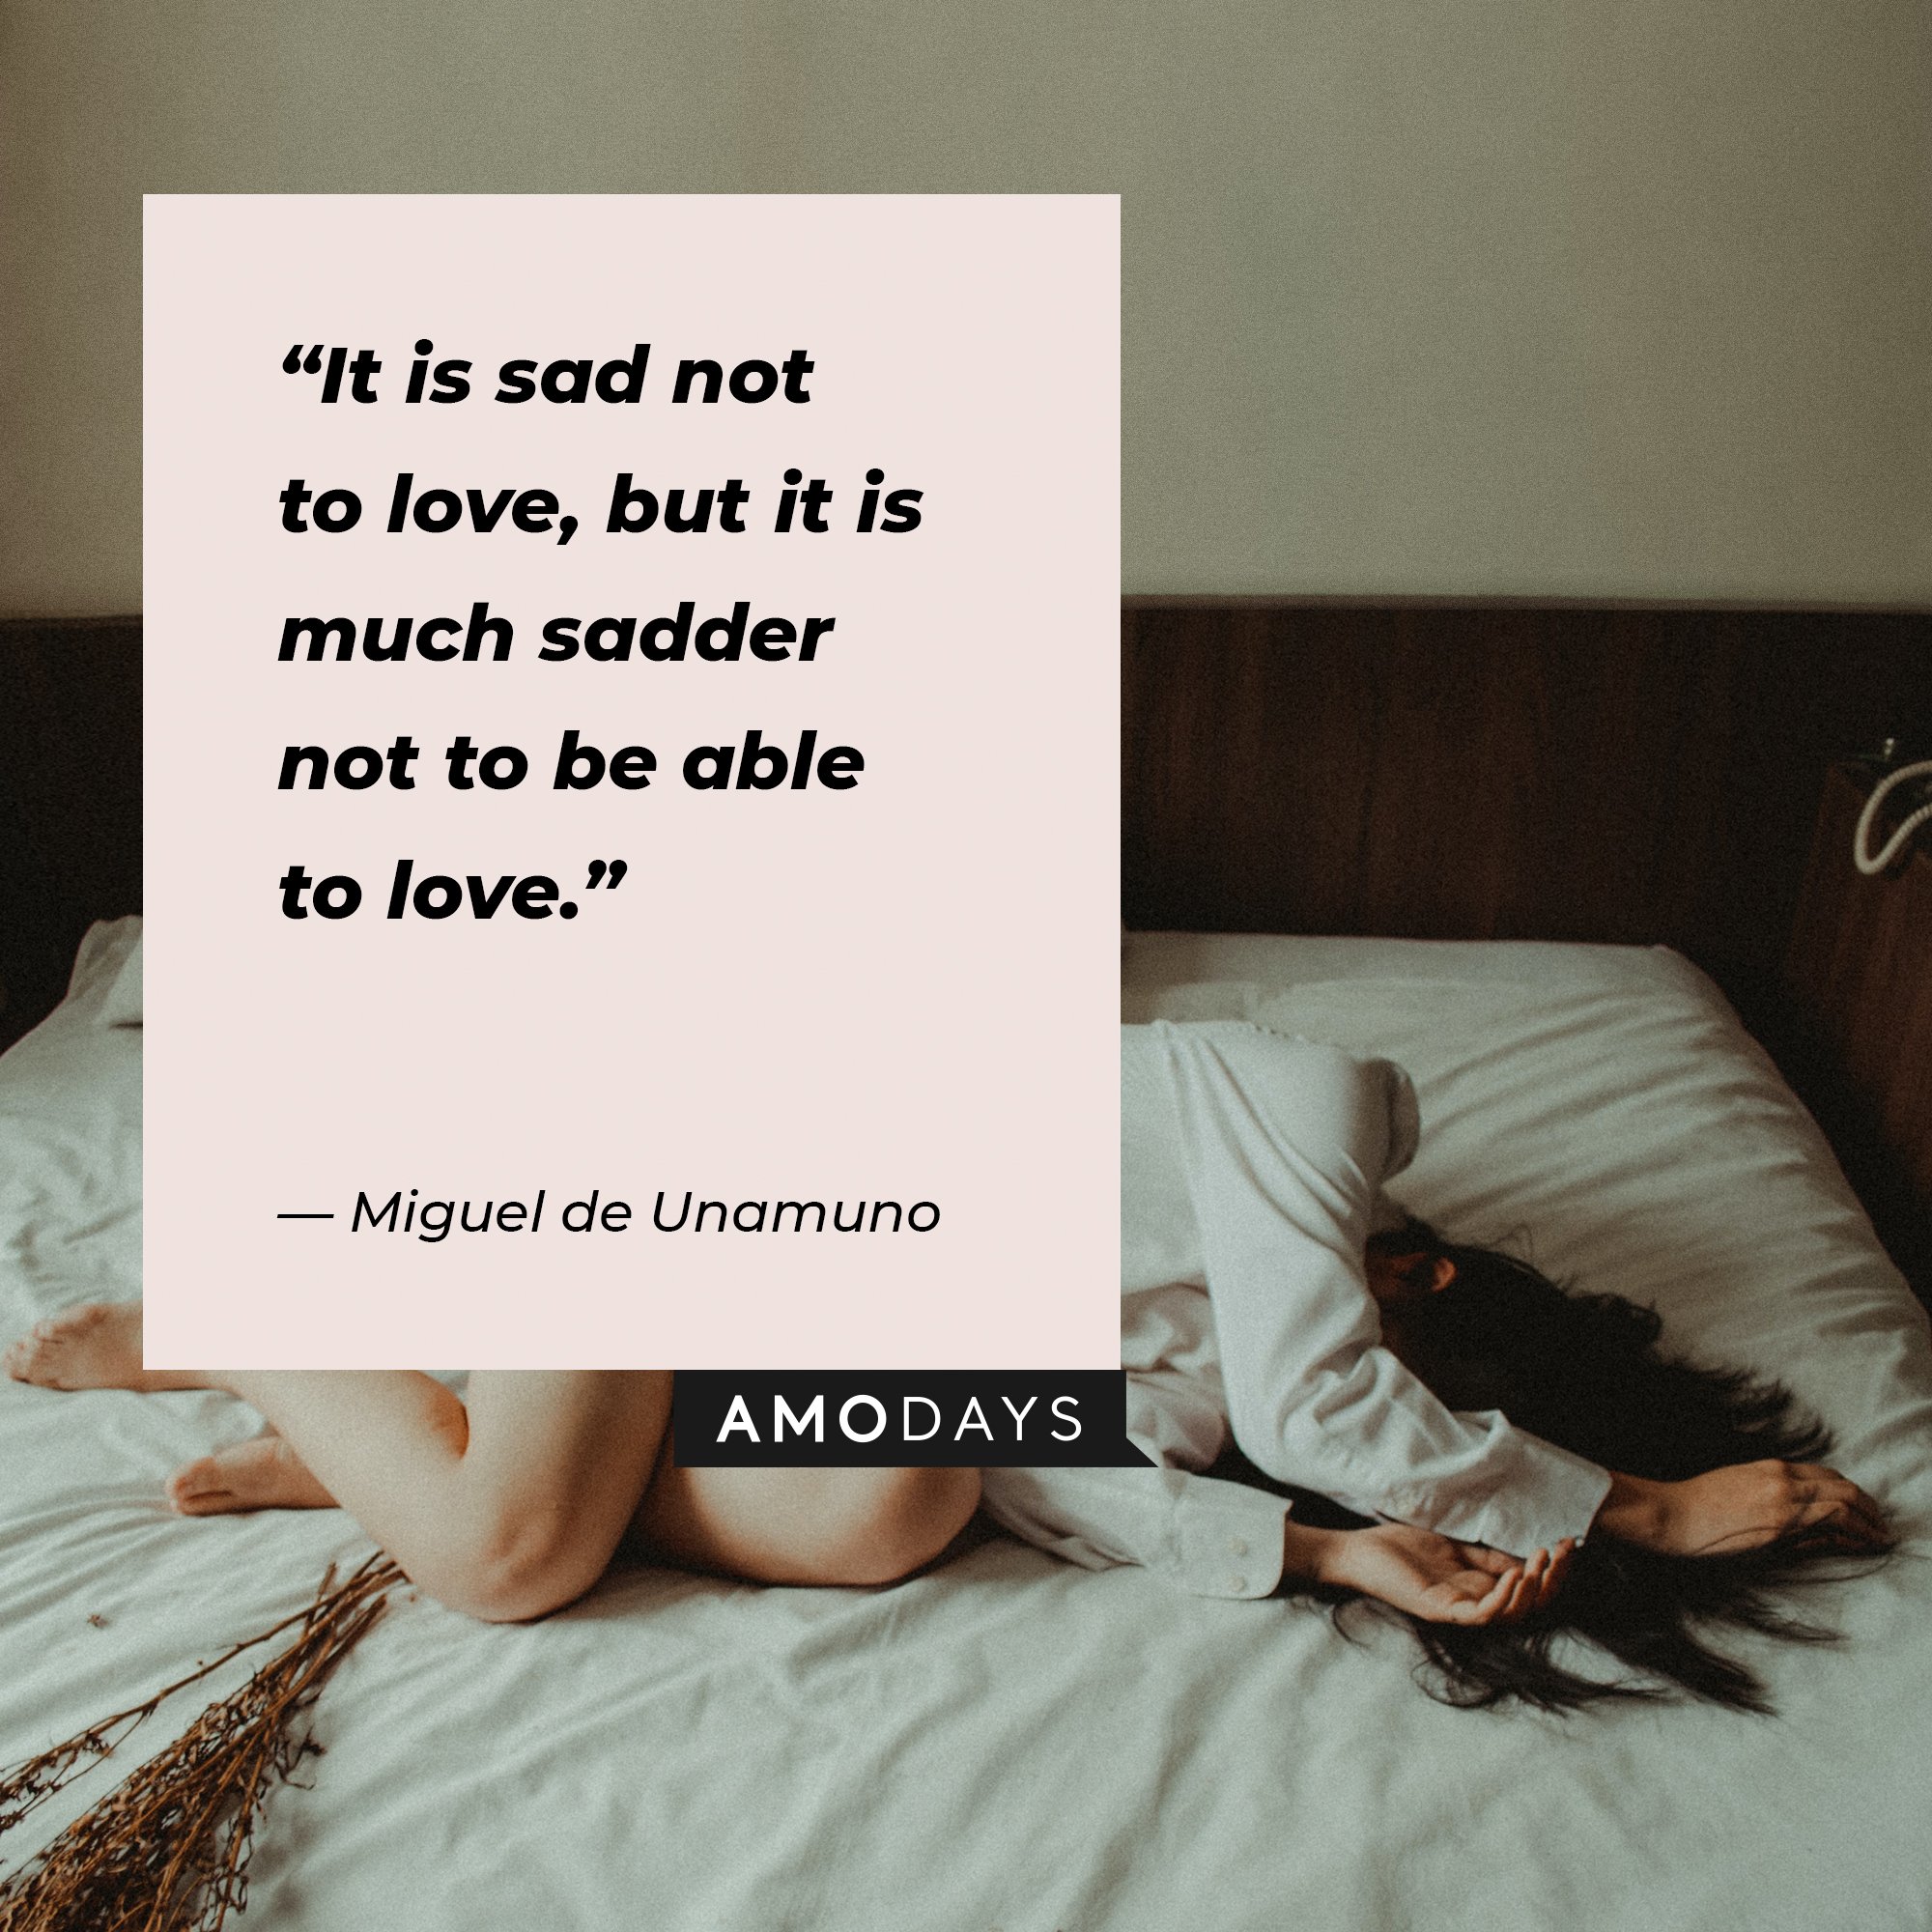 Miguel de Unamuno’s quote:“It is sad not to love, but it is much sadder not to be able to love.”  | Image: AmoDays